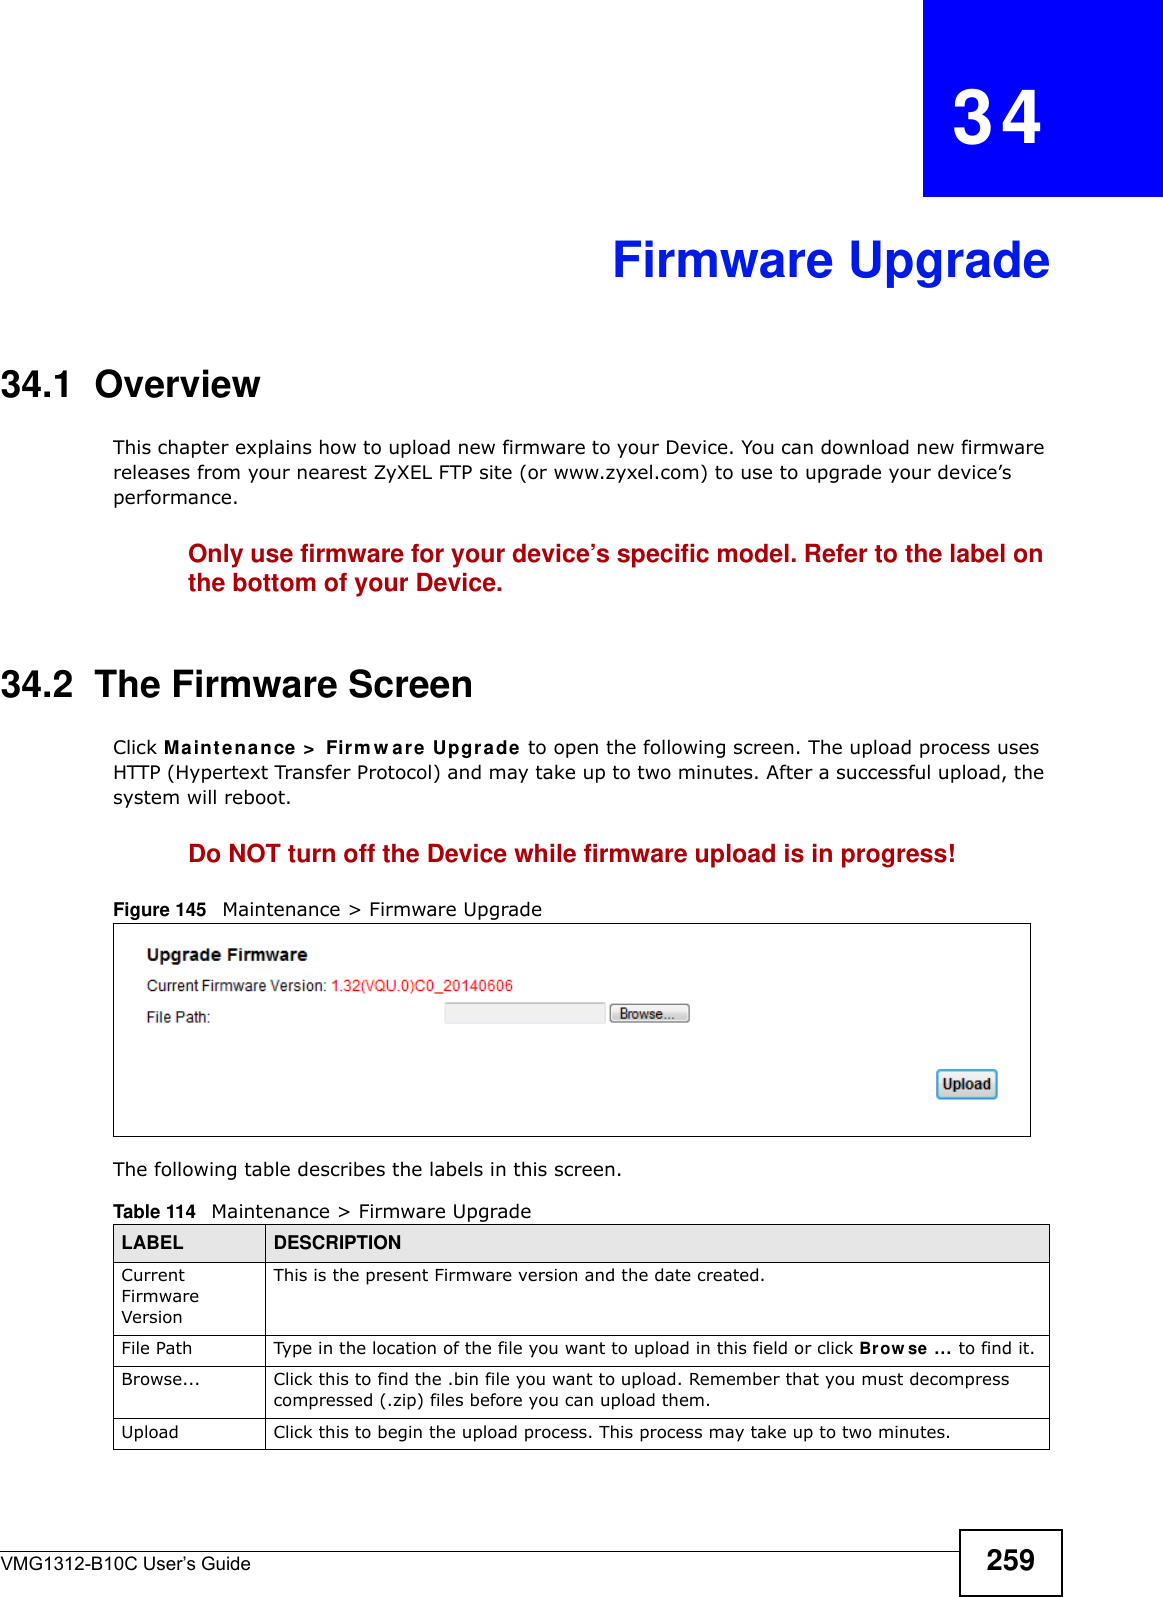 VMG1312-B10C User’s Guide 259CHAPTER   34Firmware Upgrade34.1  OverviewThis chapter explains how to upload new firmware to your Device. You can download new firmware releases from your nearest ZyXEL FTP site (or www.zyxel.com) to use to upgrade your device’s performance.Only use firmware for your device’s specific model. Refer to the label on the bottom of your Device.34.2  The Firmware ScreenClick M a in t e n a nce &gt;  Fir m w a r e Upgr a de  to open the following screen. The upload process uses HTTP (Hypertext Transfer Protocol) and may take up to two minutes. After a successful upload, the system will reboot. Do NOT turn off the Device while firmware upload is in progress!Figure 145   Maintenance &gt; Firmware UpgradeThe following table describes the labels in this screen. Table 114   Maintenance &gt; Firmware UpgradeLABEL DESCRIPTIONCurrent Firmware VersionThis is the present Firmware version and the date created. File Path Type in the location of the file you want to upload in this field or click Brow se  ... to find it.Browse...  Click this to find the .bin file you want to upload. Remember that you must decompress compressed (.zip) files before you can upload them. Upload  Click this to begin the upload process. This process may take up to two minutes.